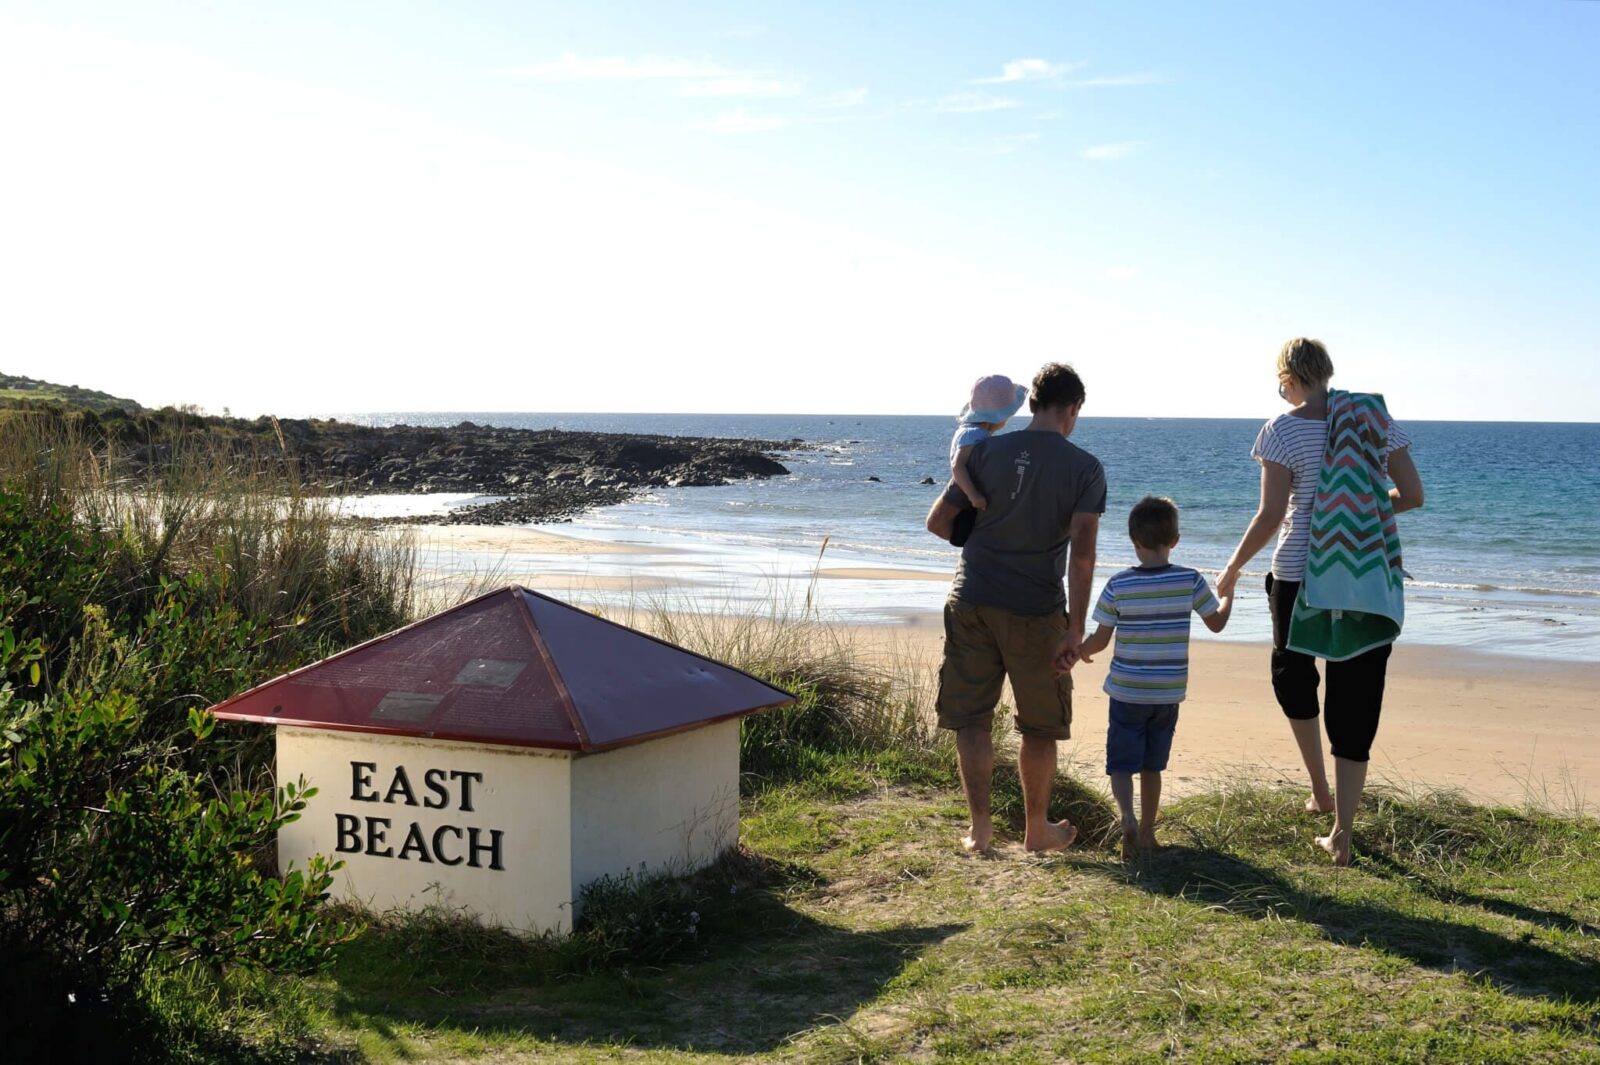 This image shows a family walking towards East Beach.